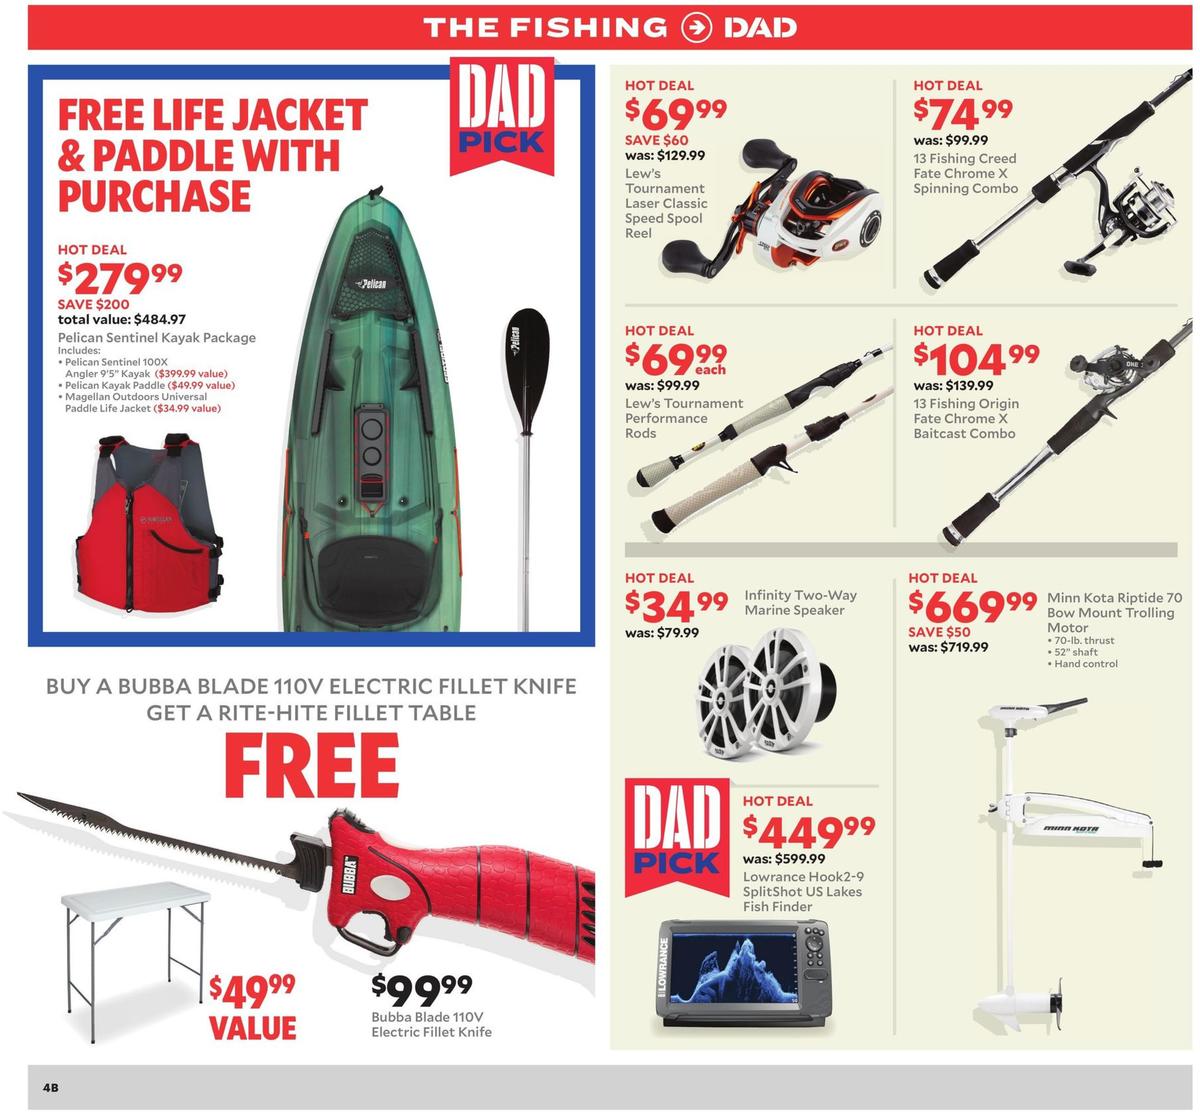 Academy Sports + Outdoors Weekly Ad from June 9